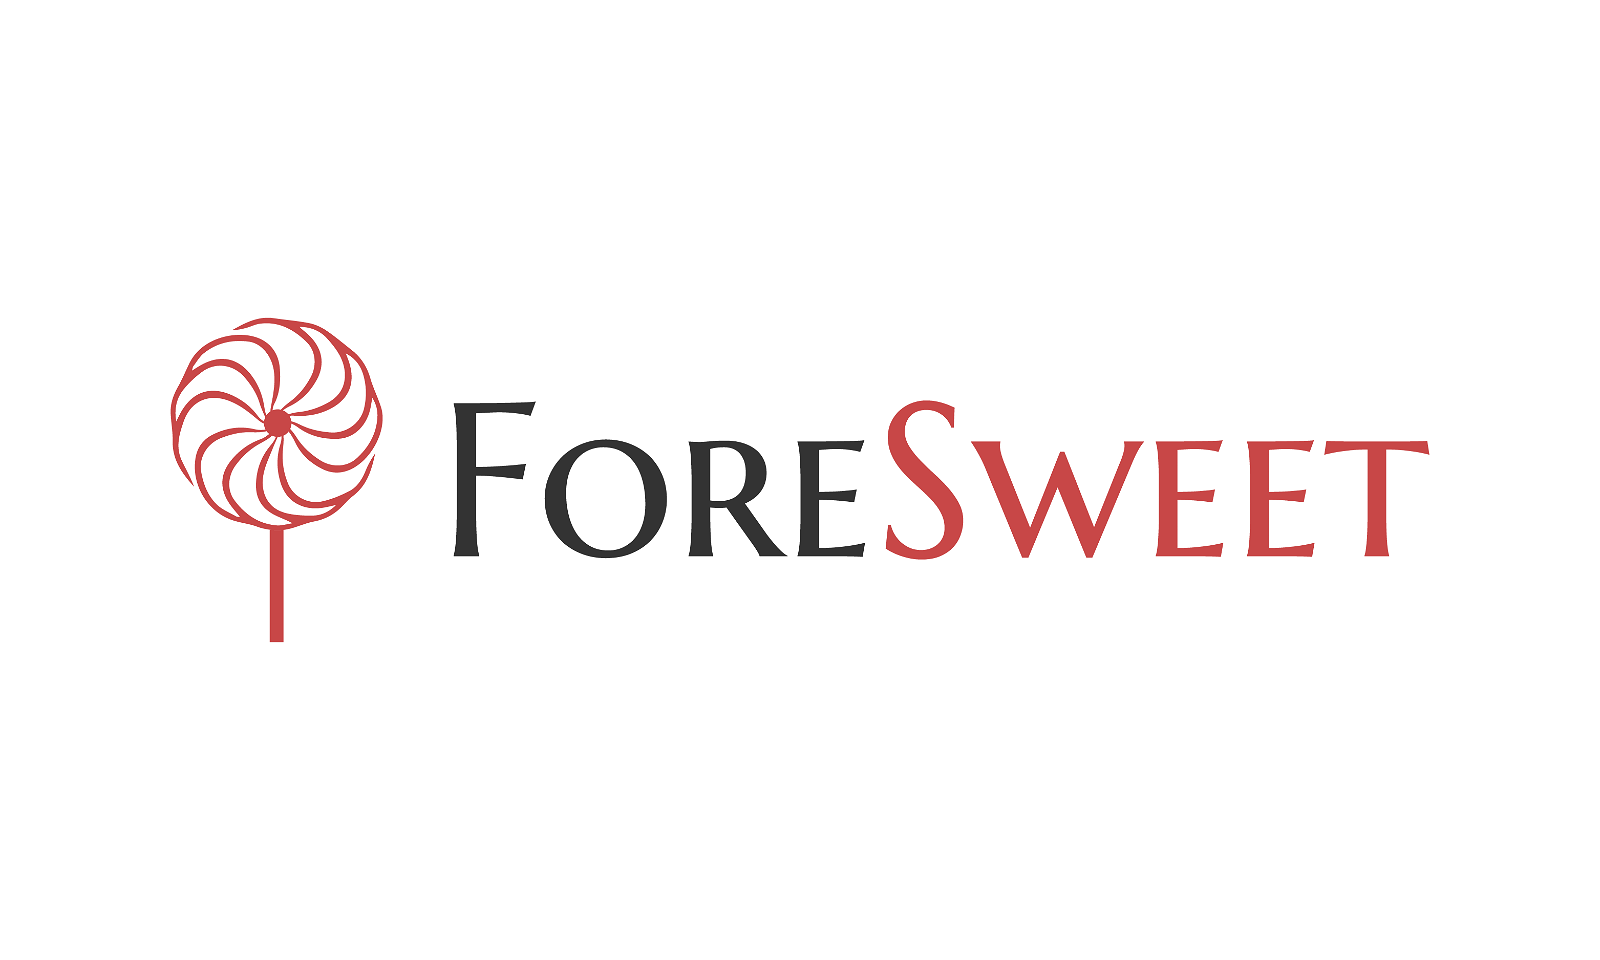 ForeSweet.com - Creative brandable domain for sale